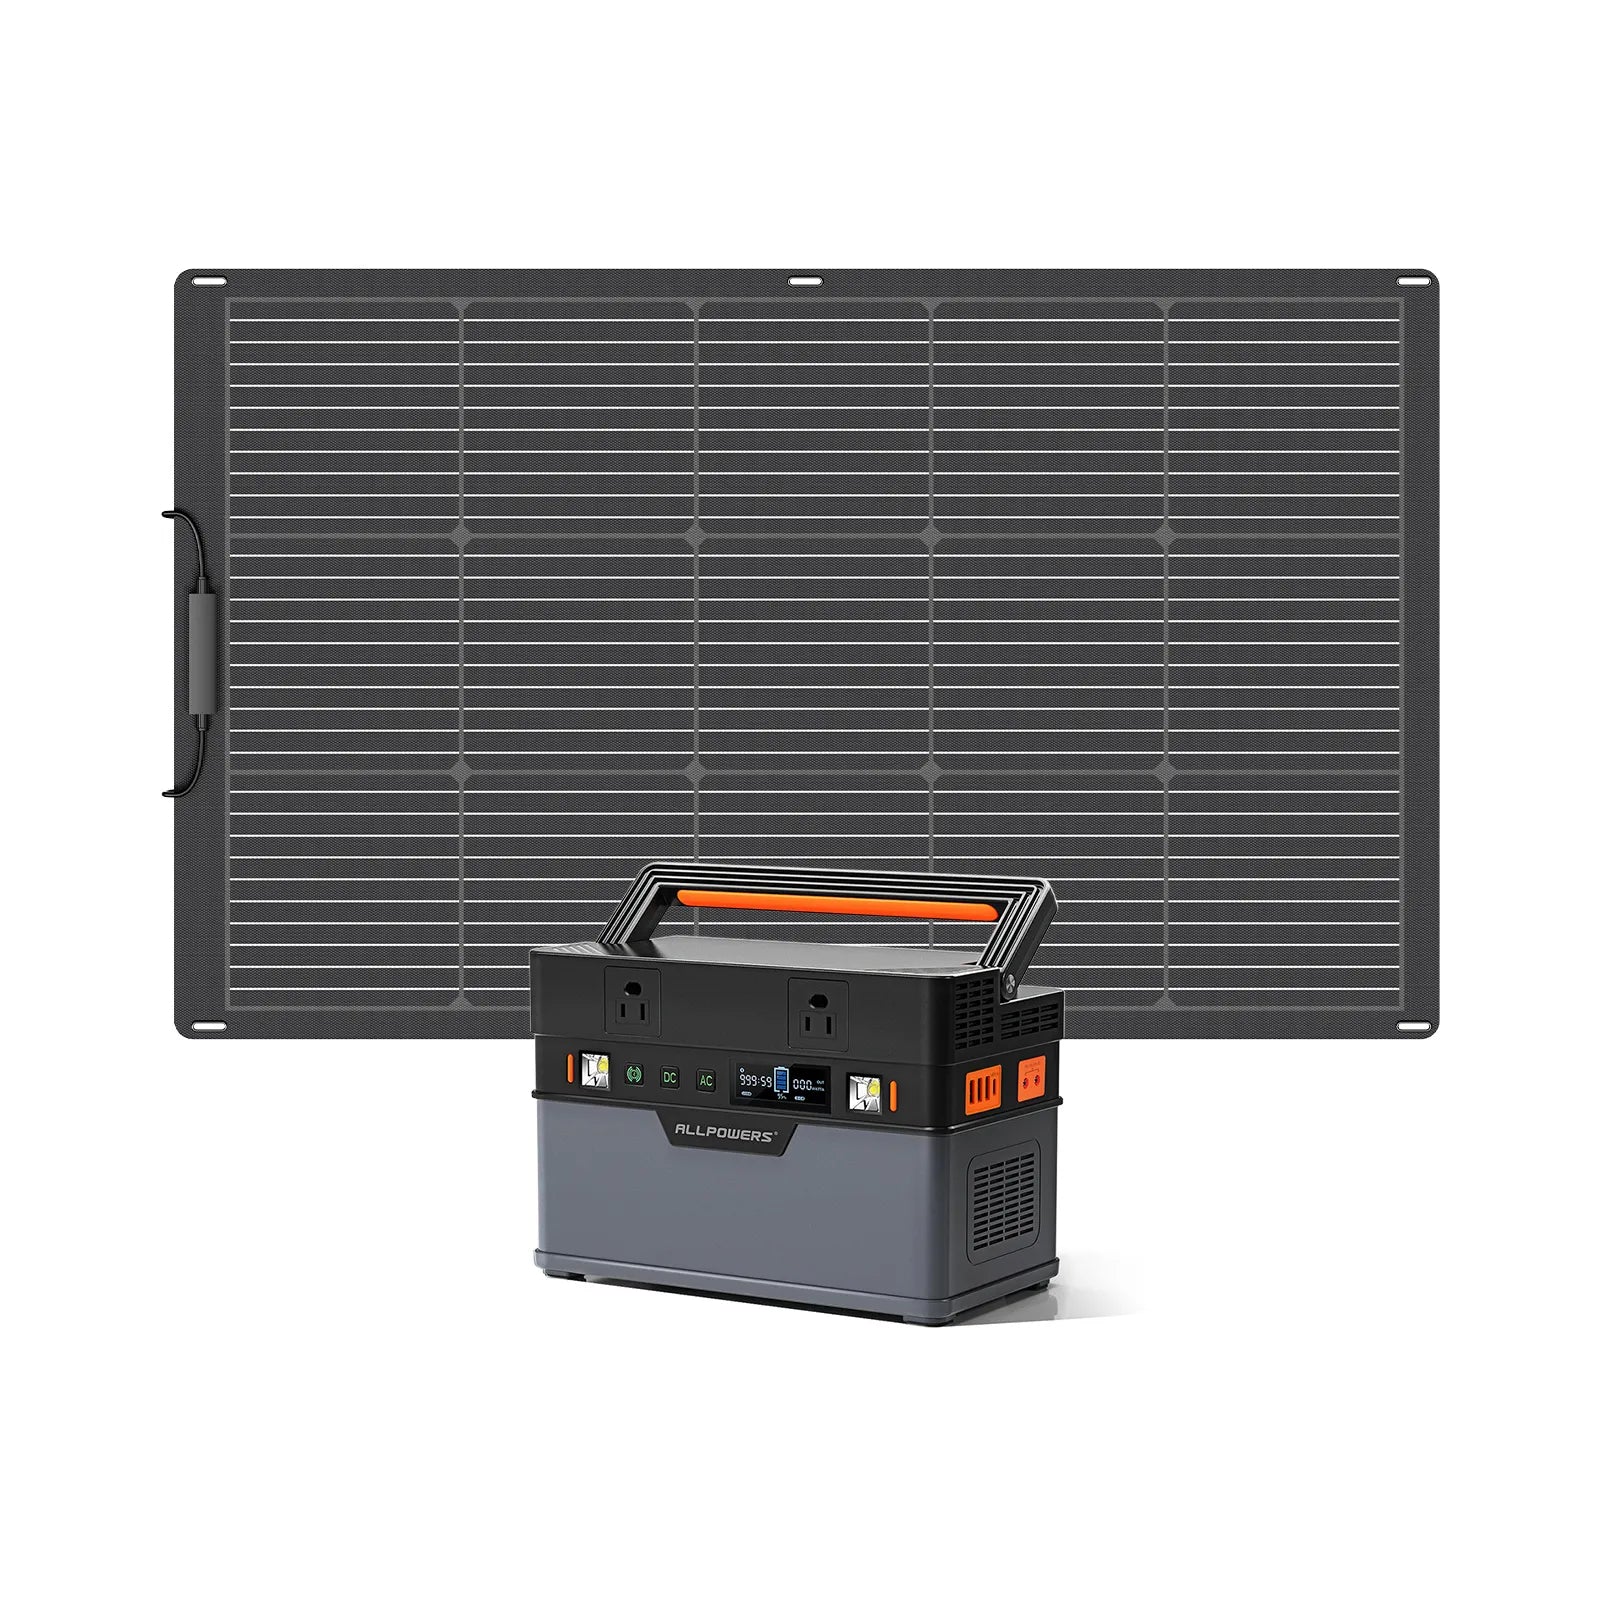 ALLPOWERS S700 Portable Power Station 700W 606Wh (S300 + SF100 Flexible 100W Solar Panel)